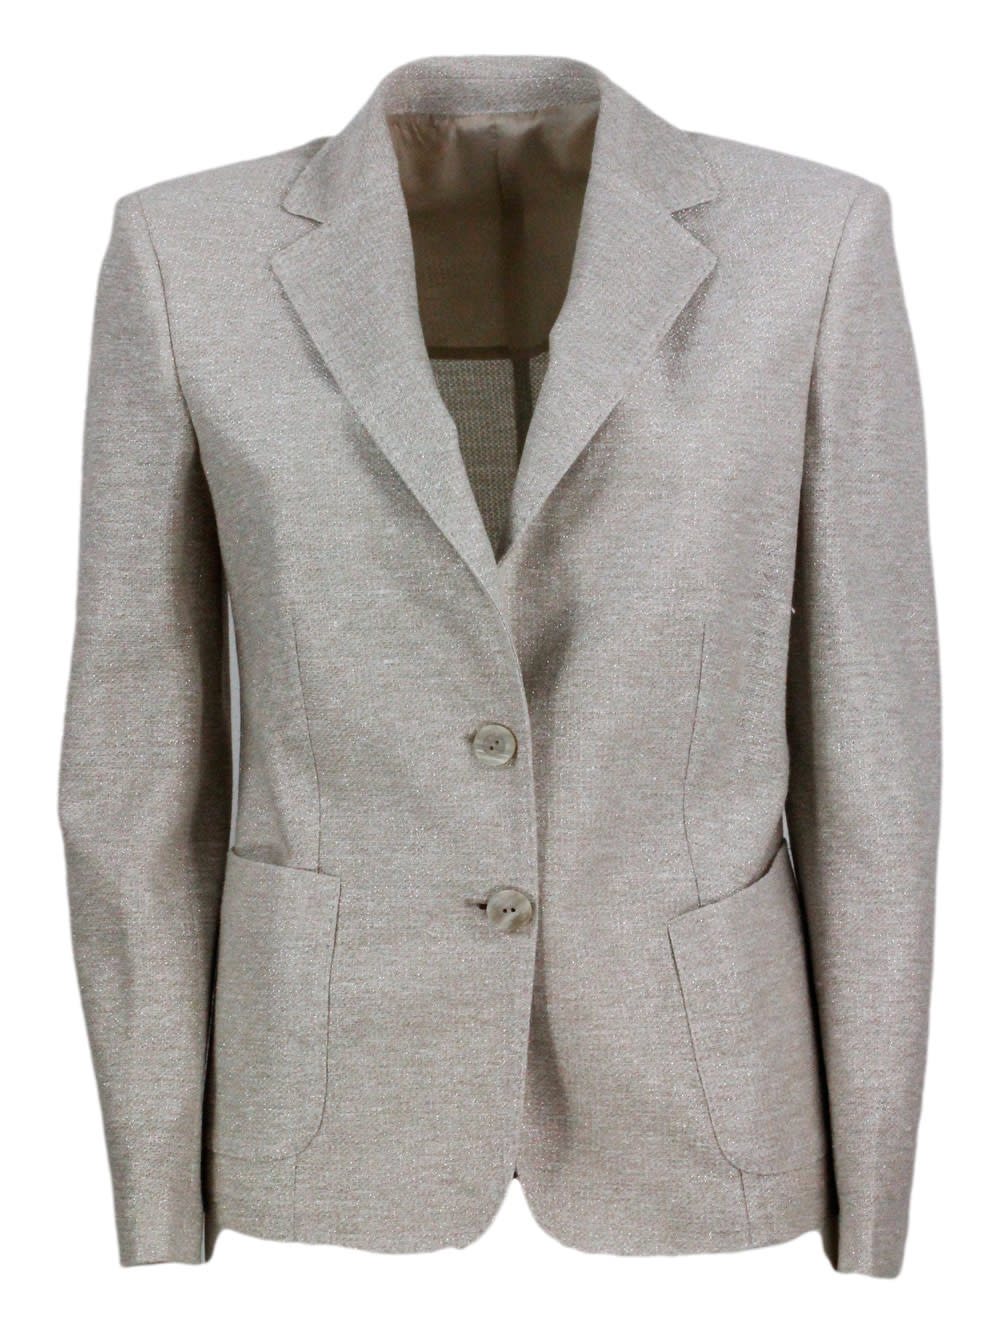 Single-breasted Two-button Jacket Made Of Linen And Cotton And Embellished With Bright Lurex Threads